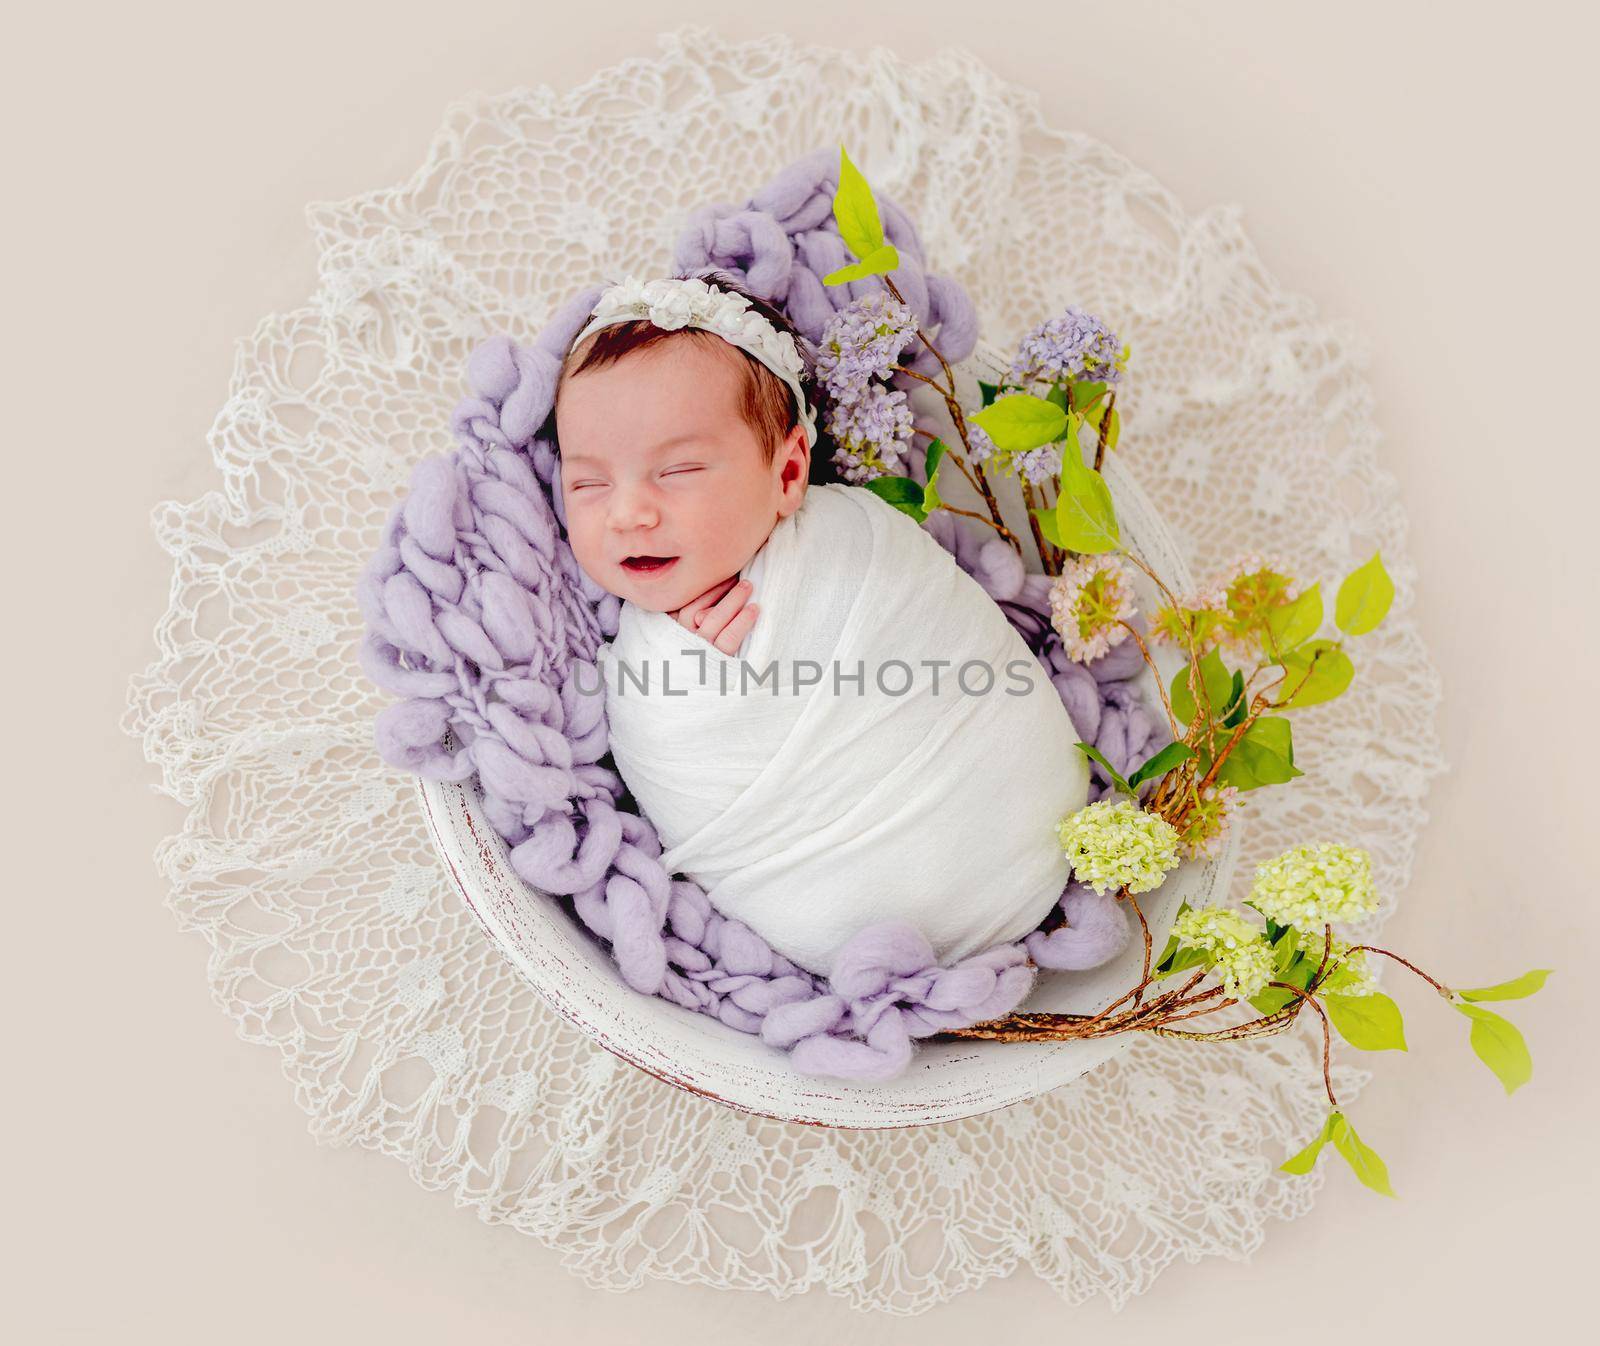 Portrait of little beautiful newborn baby girl swaadled in fabric and wearing wreath with flowers sleeping and smiling in basin with decoration during studio photoshoot. Cute infant child